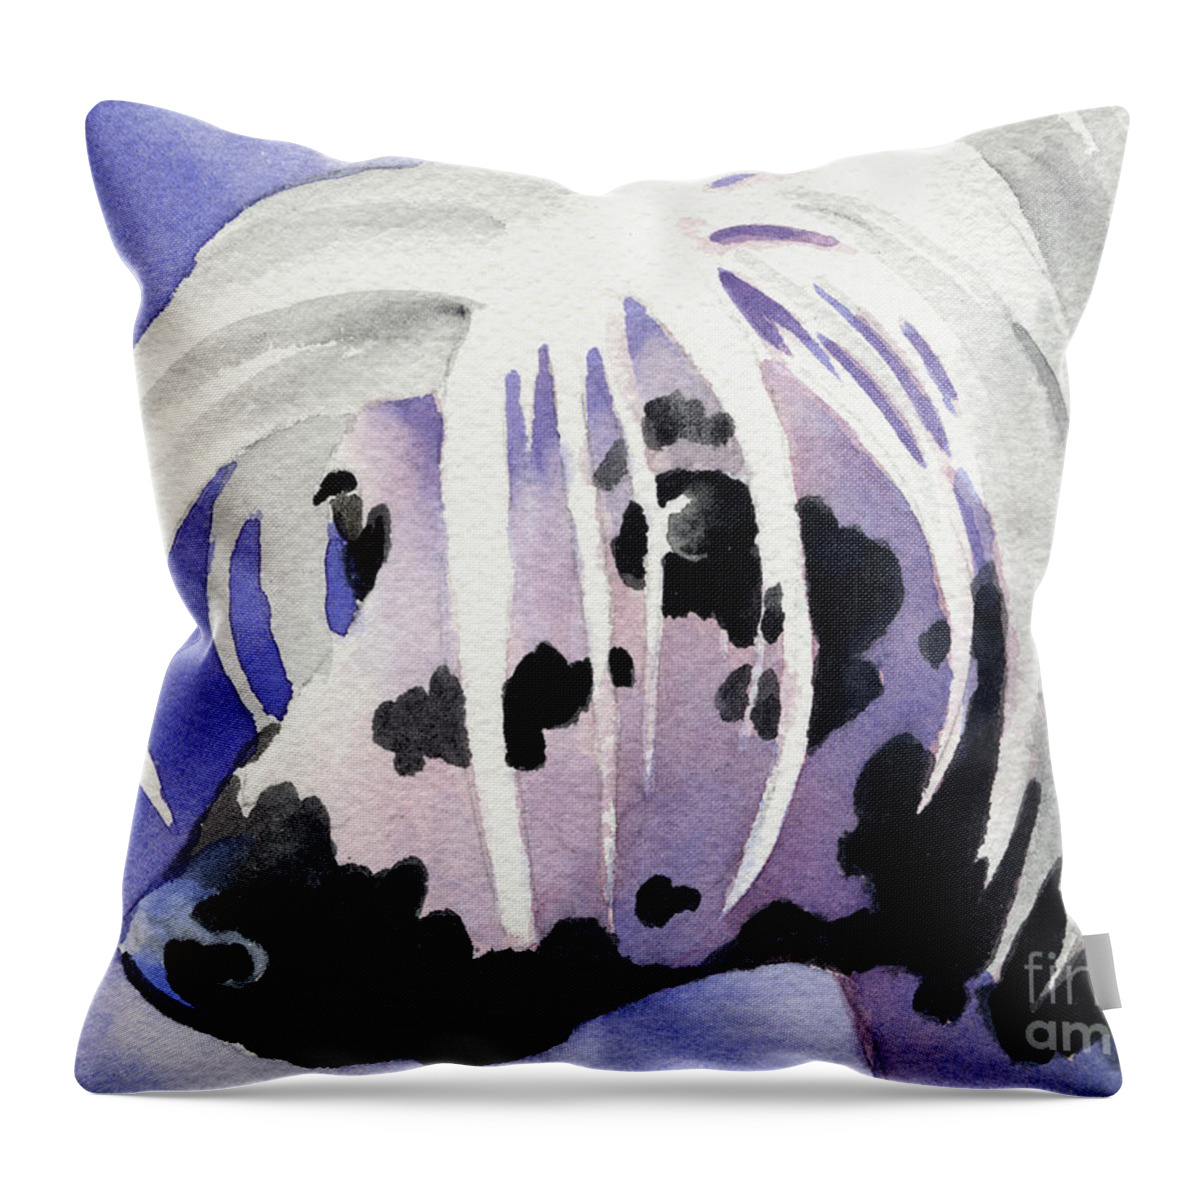 Chinese Crested Throw Pillow featuring the painting Chinese Crested Dog by David Rogers